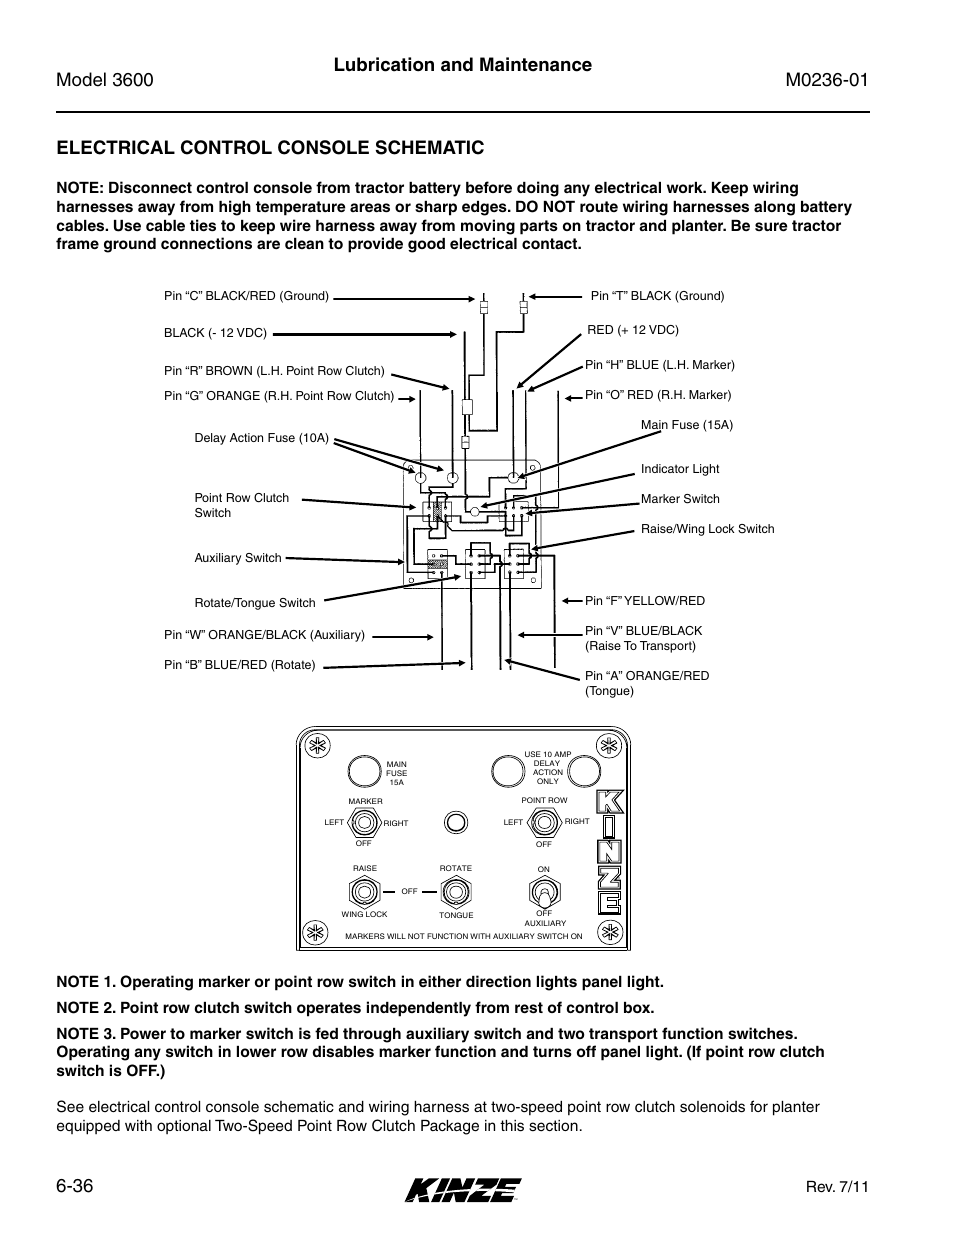 Electrical control console schematic, Electrical control console schematic -36, Rev. 7/11 | Kinze 3600 Lift and Rotate Planter Rev. 7/14 User Manual | Page 144 / 172